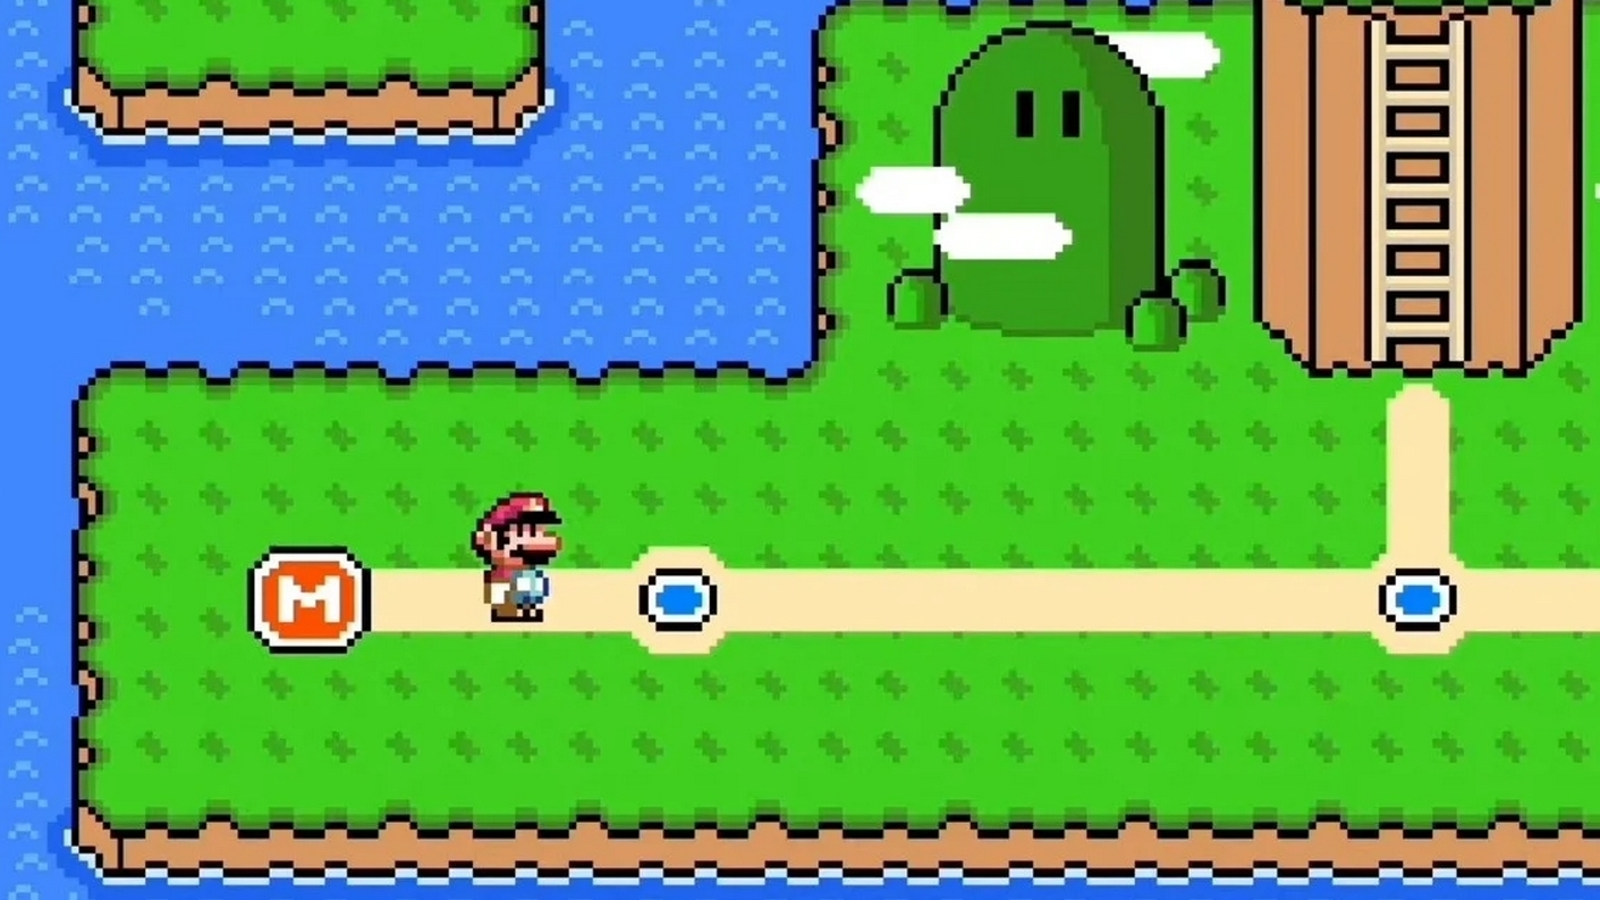 Reprogramming Super Mario World From Inside The Game